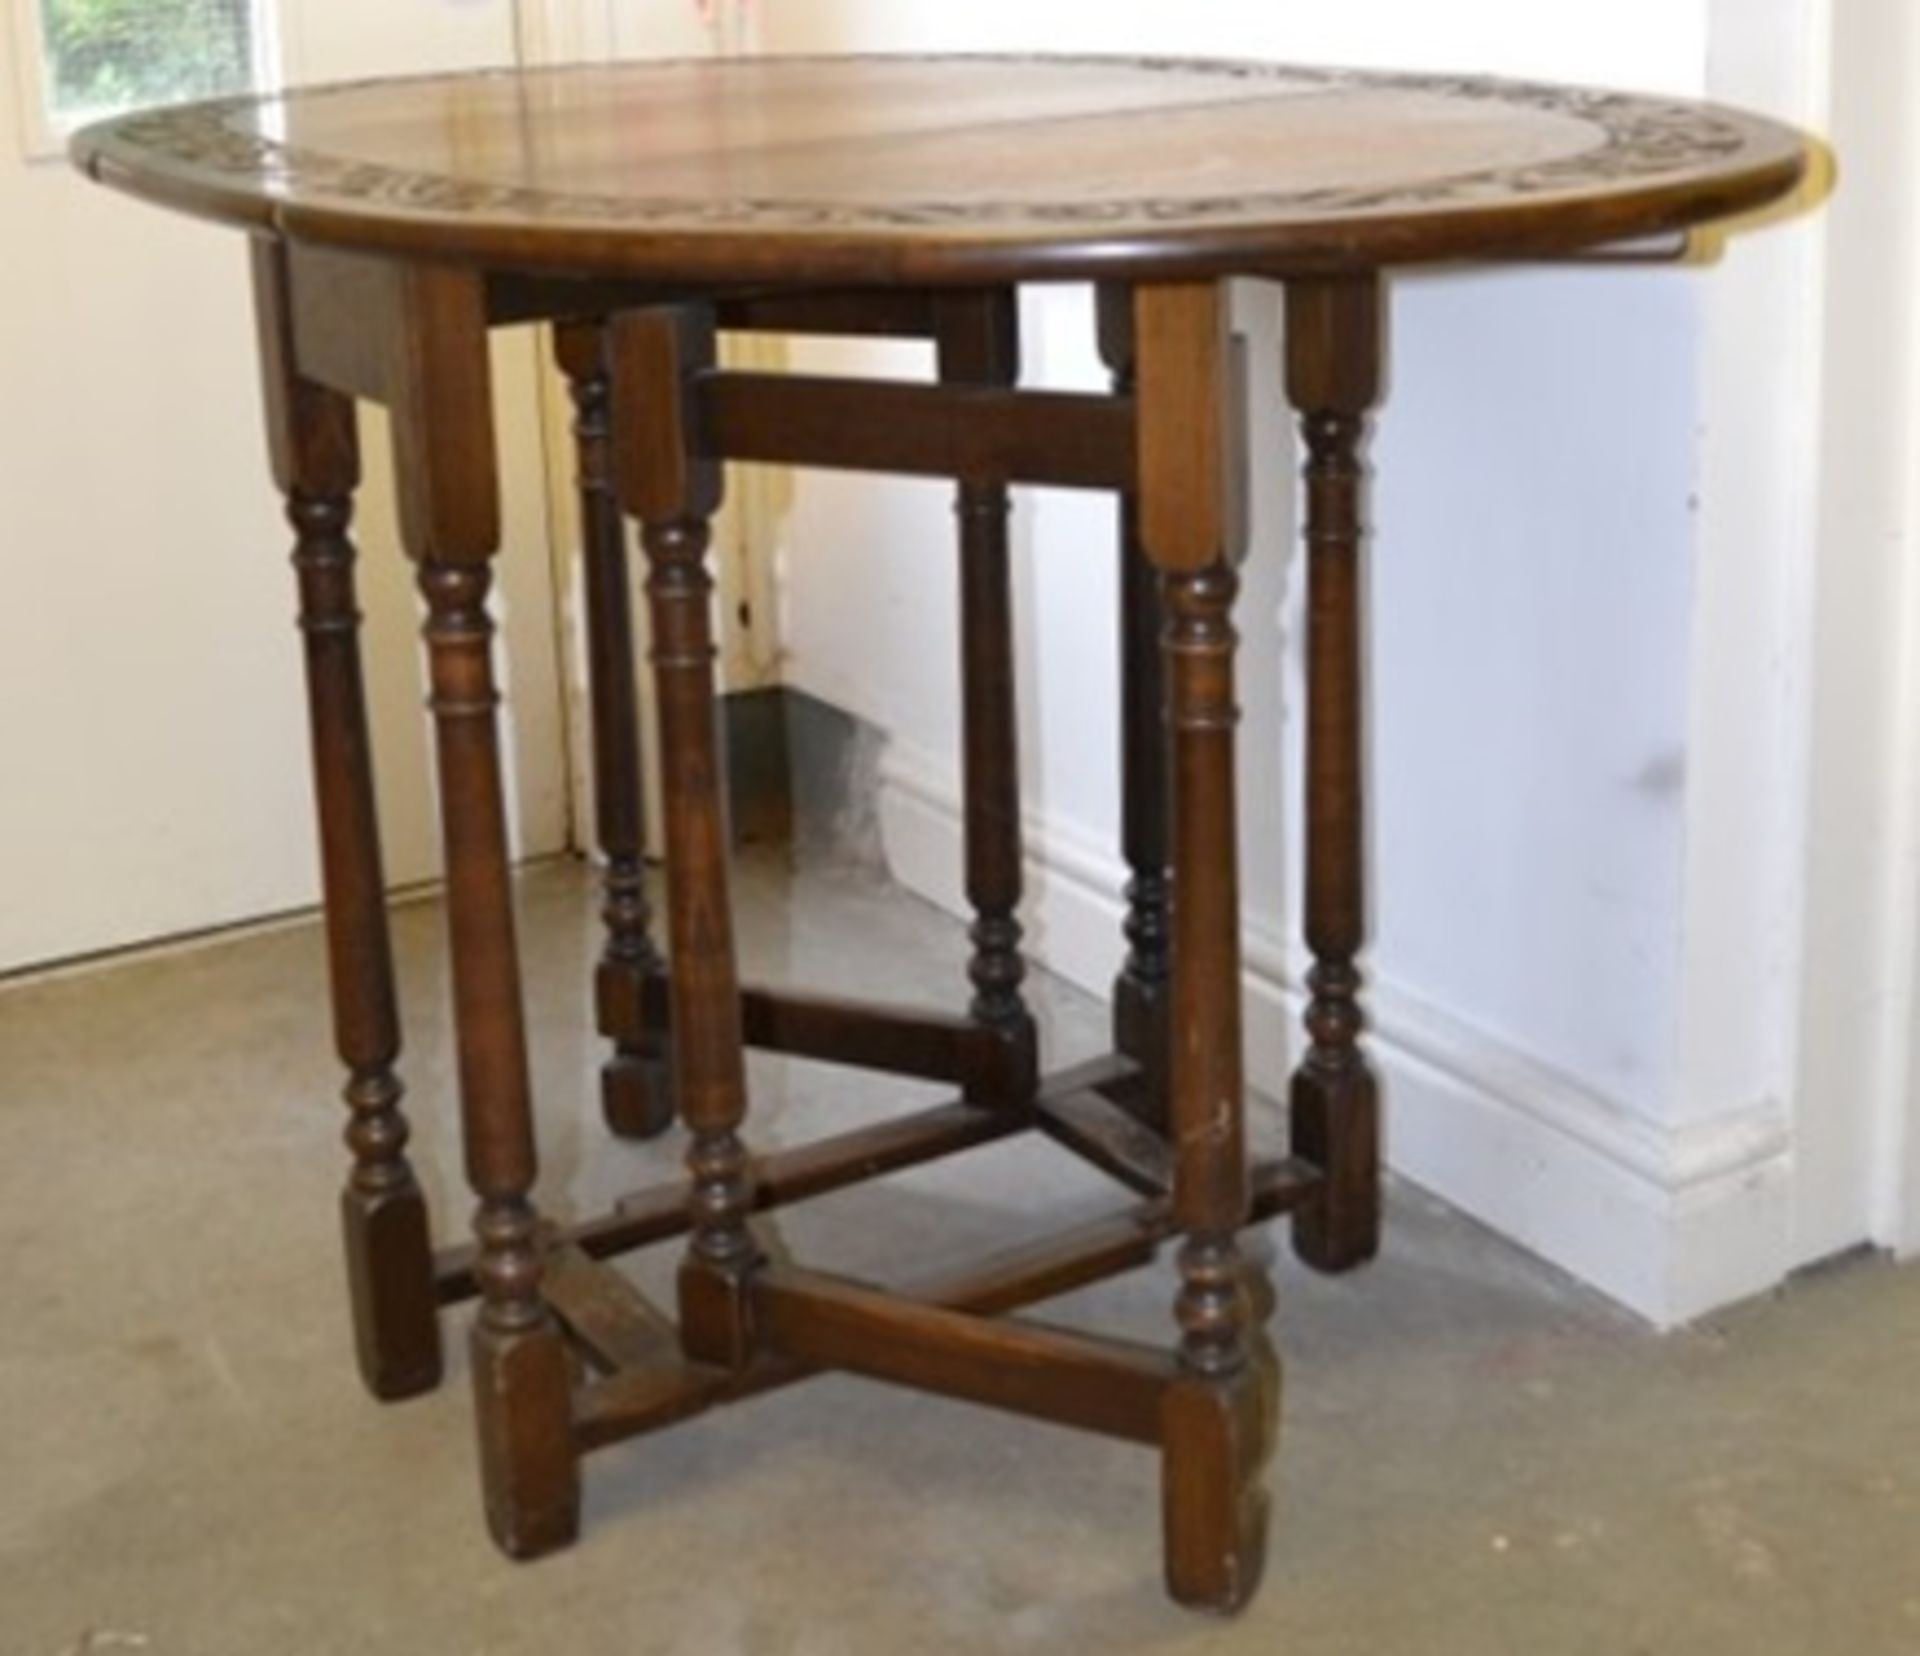 1 x Vintage Drop Leaf Solid Wood Table With Carved Floral Decoration - From A Grade II Listed Hall - Image 9 of 9